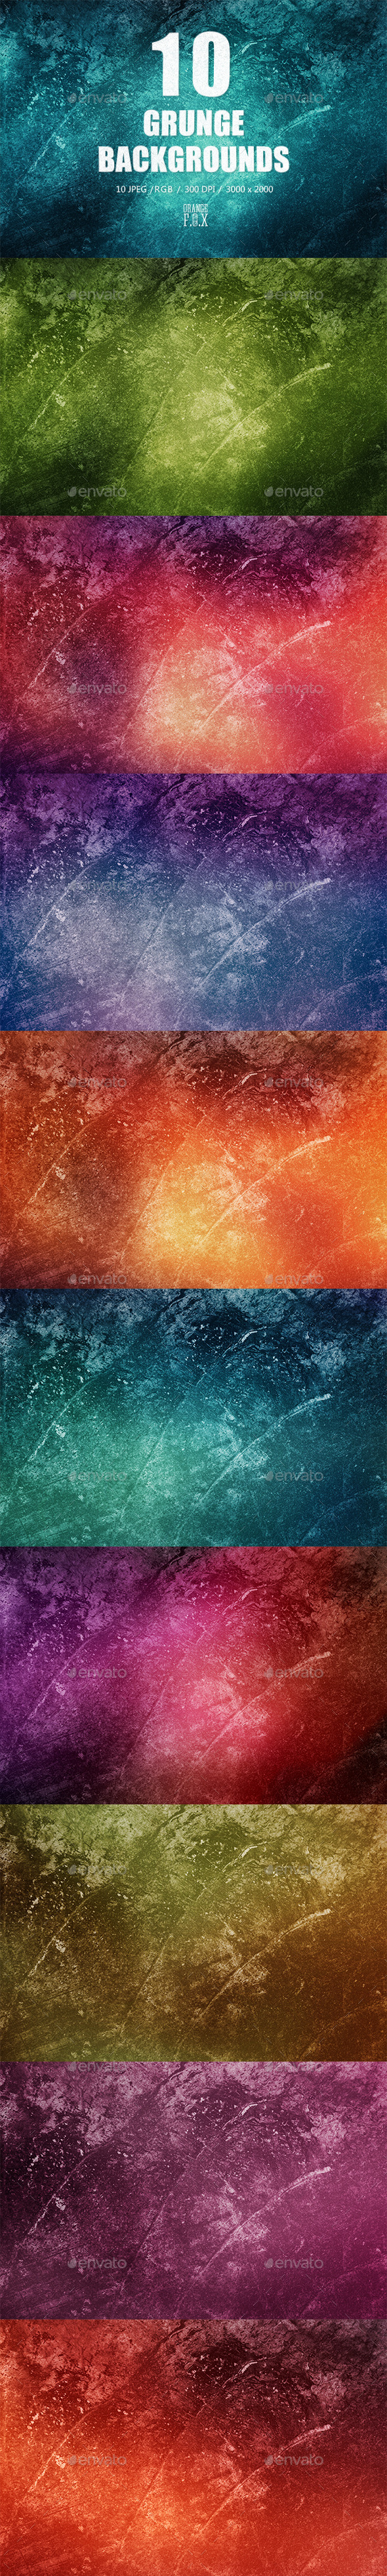 10 Grunge Texture Backgrounds_preview.jpg